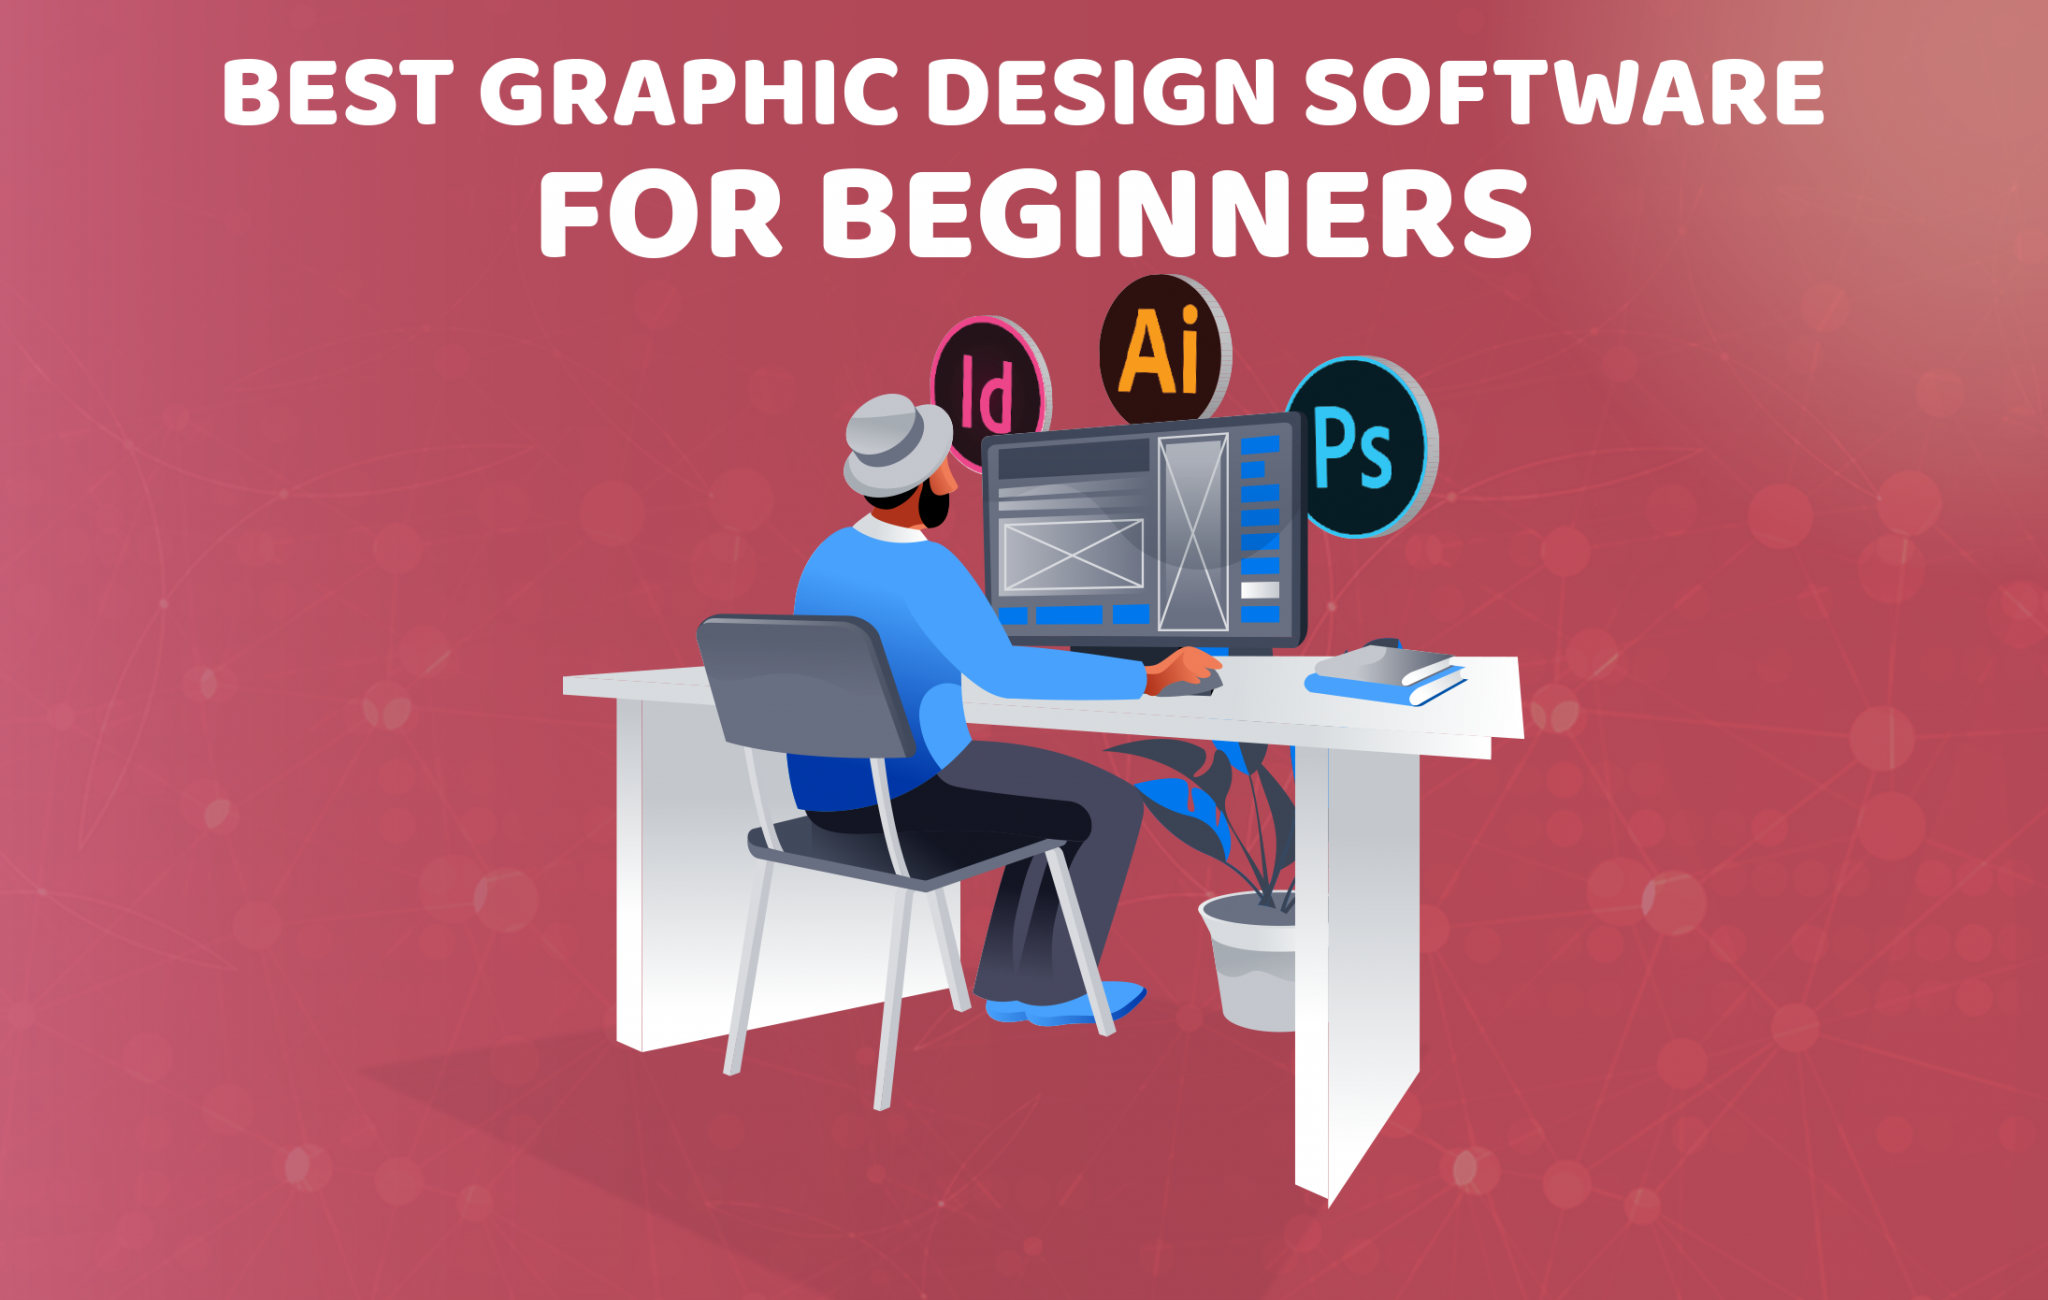 graphic design software for beginners free